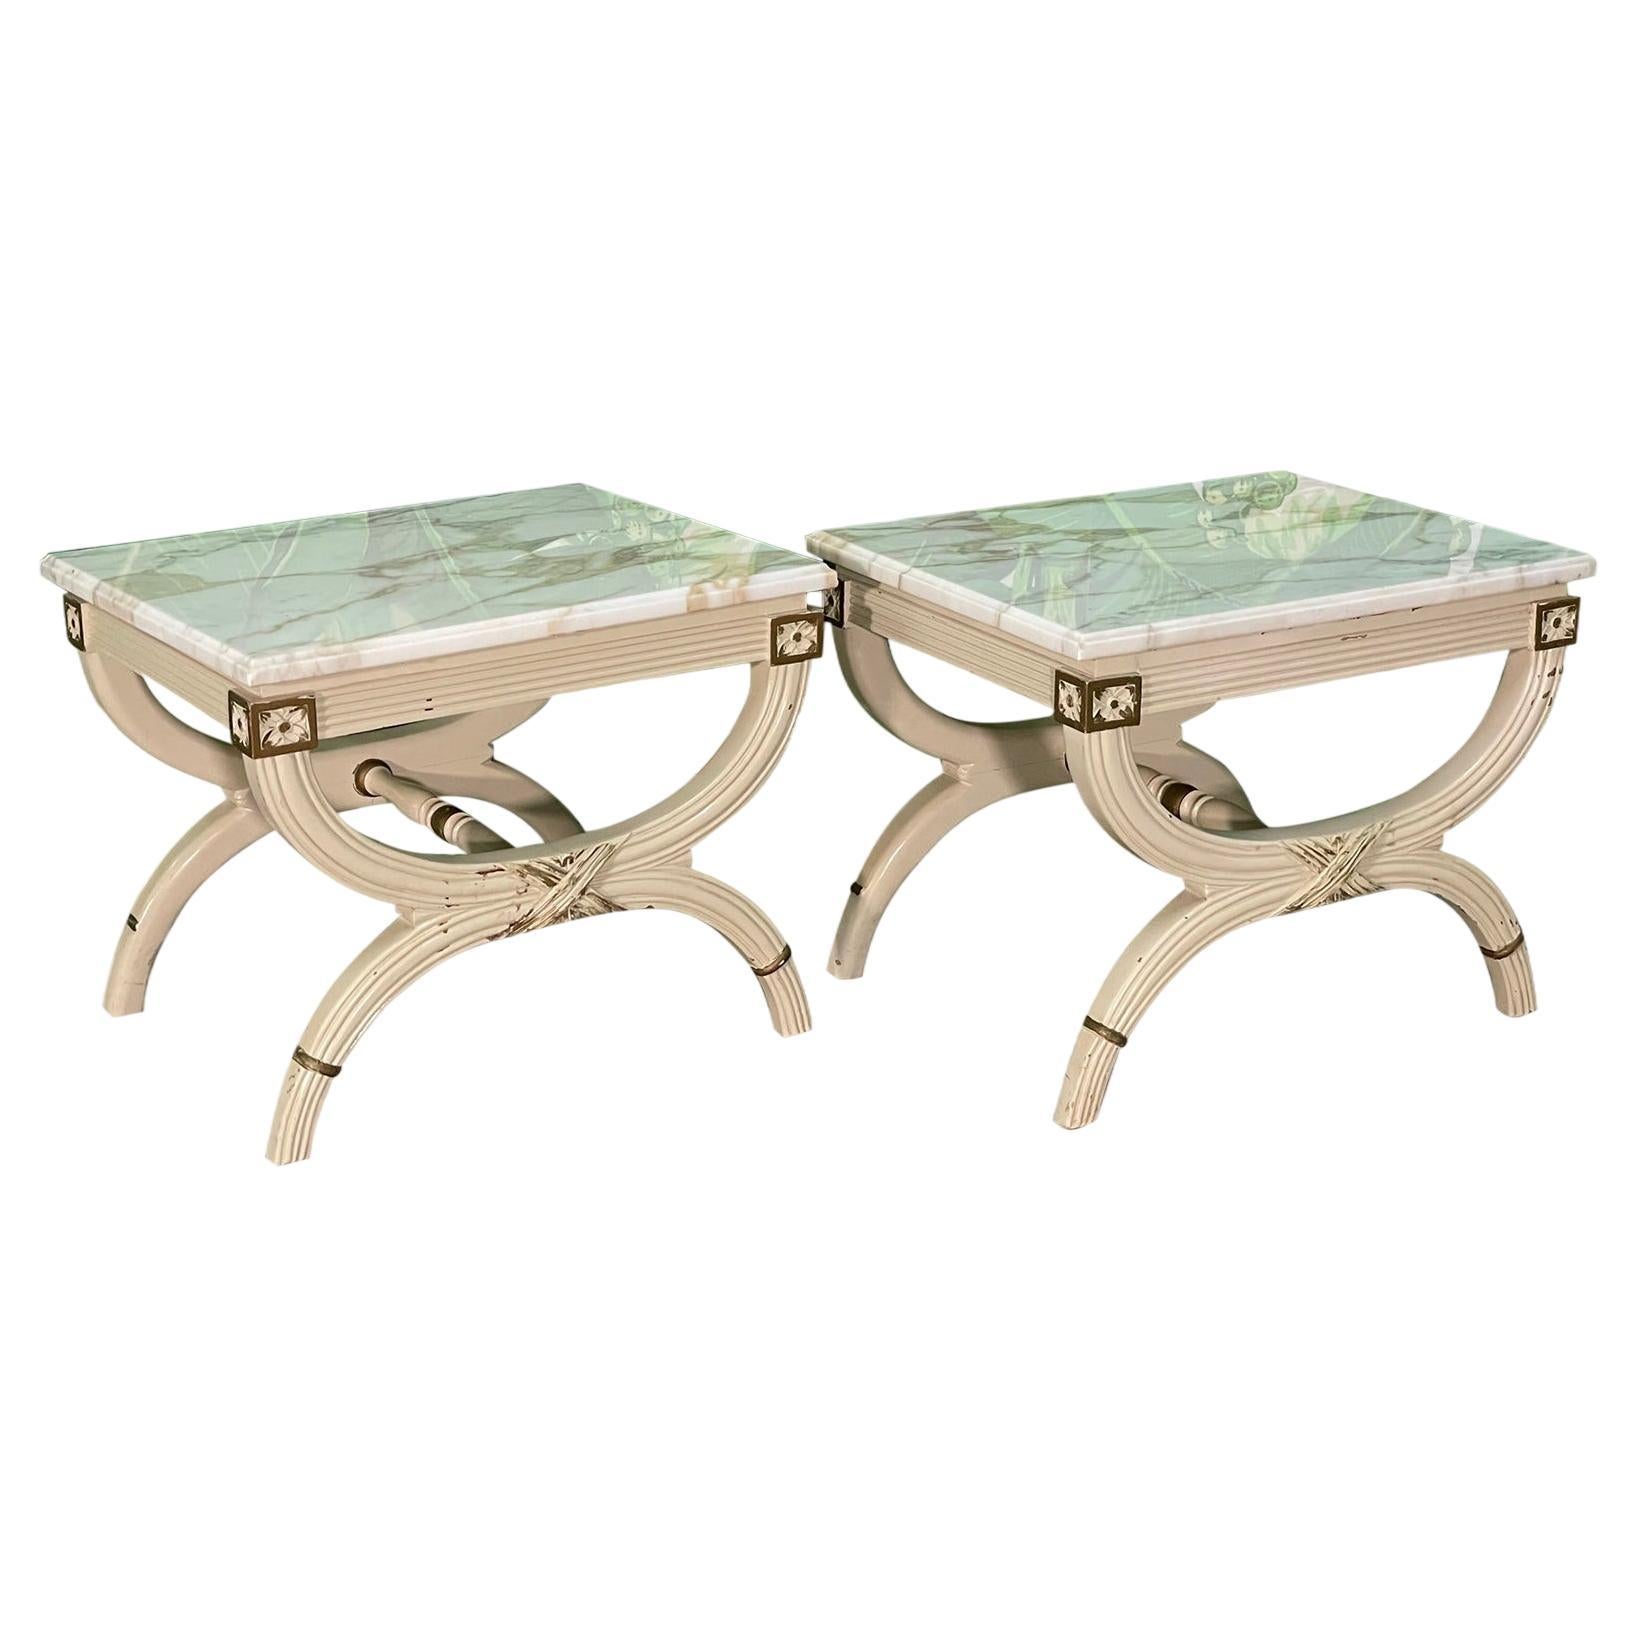 Neoclassical Revival Dorothy Draper Style End Tables or Footstools For Sale